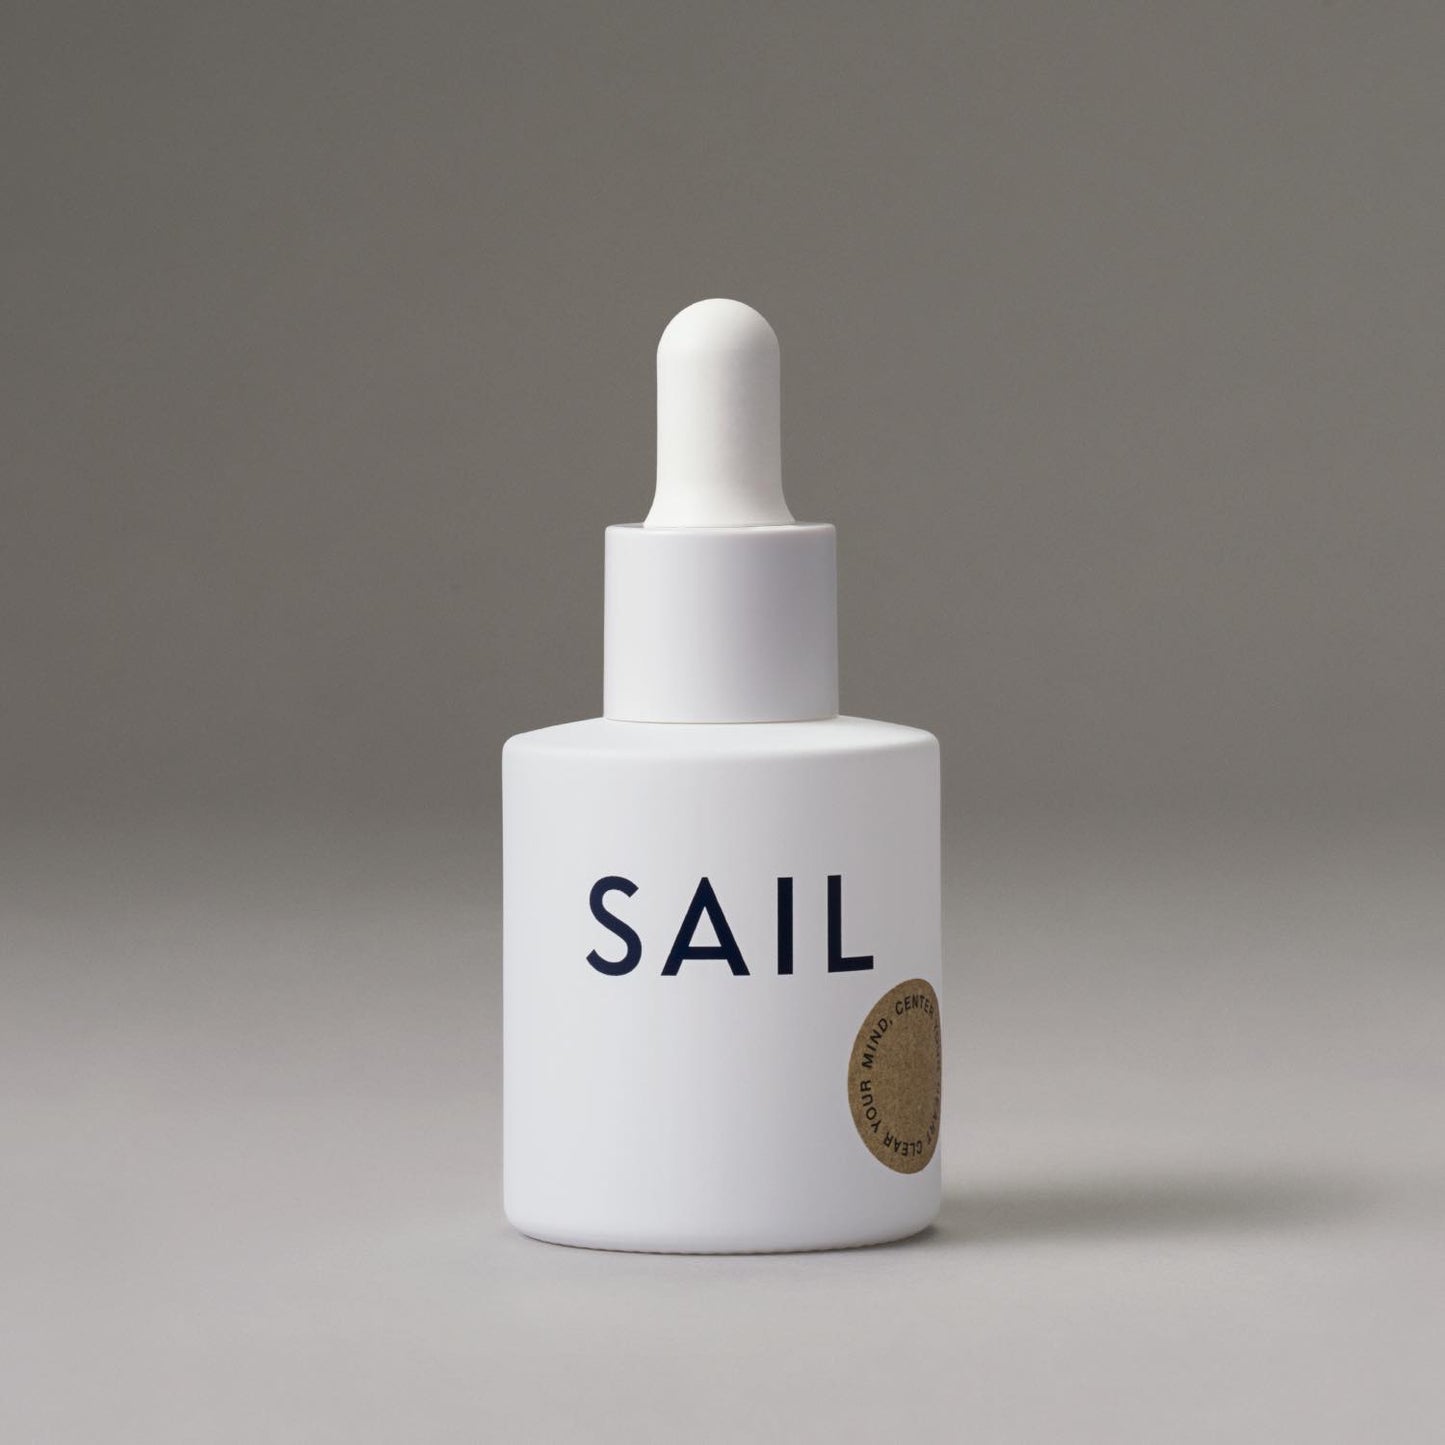 SAIL HOLIDAY KIT "THE SKIN" COLLECTION KIT-A / TERRA ADAPTOGENIC TONER & ULTIMATE OIL SERUM